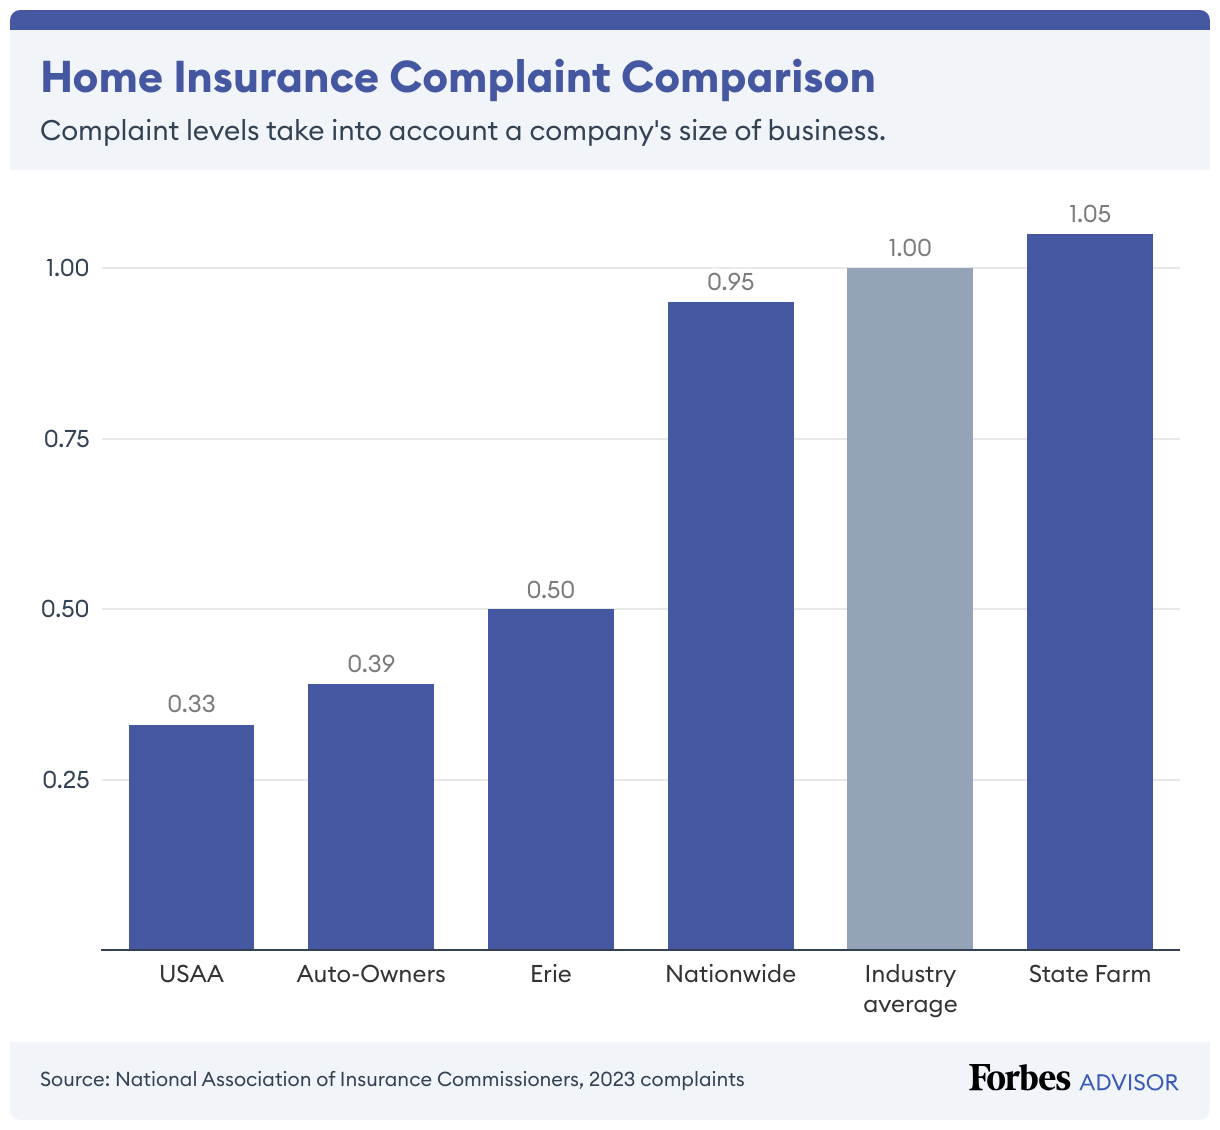 USAA has the lowest home insurance complaint levels, while State Farm has the highest which is a tad over the industry average.